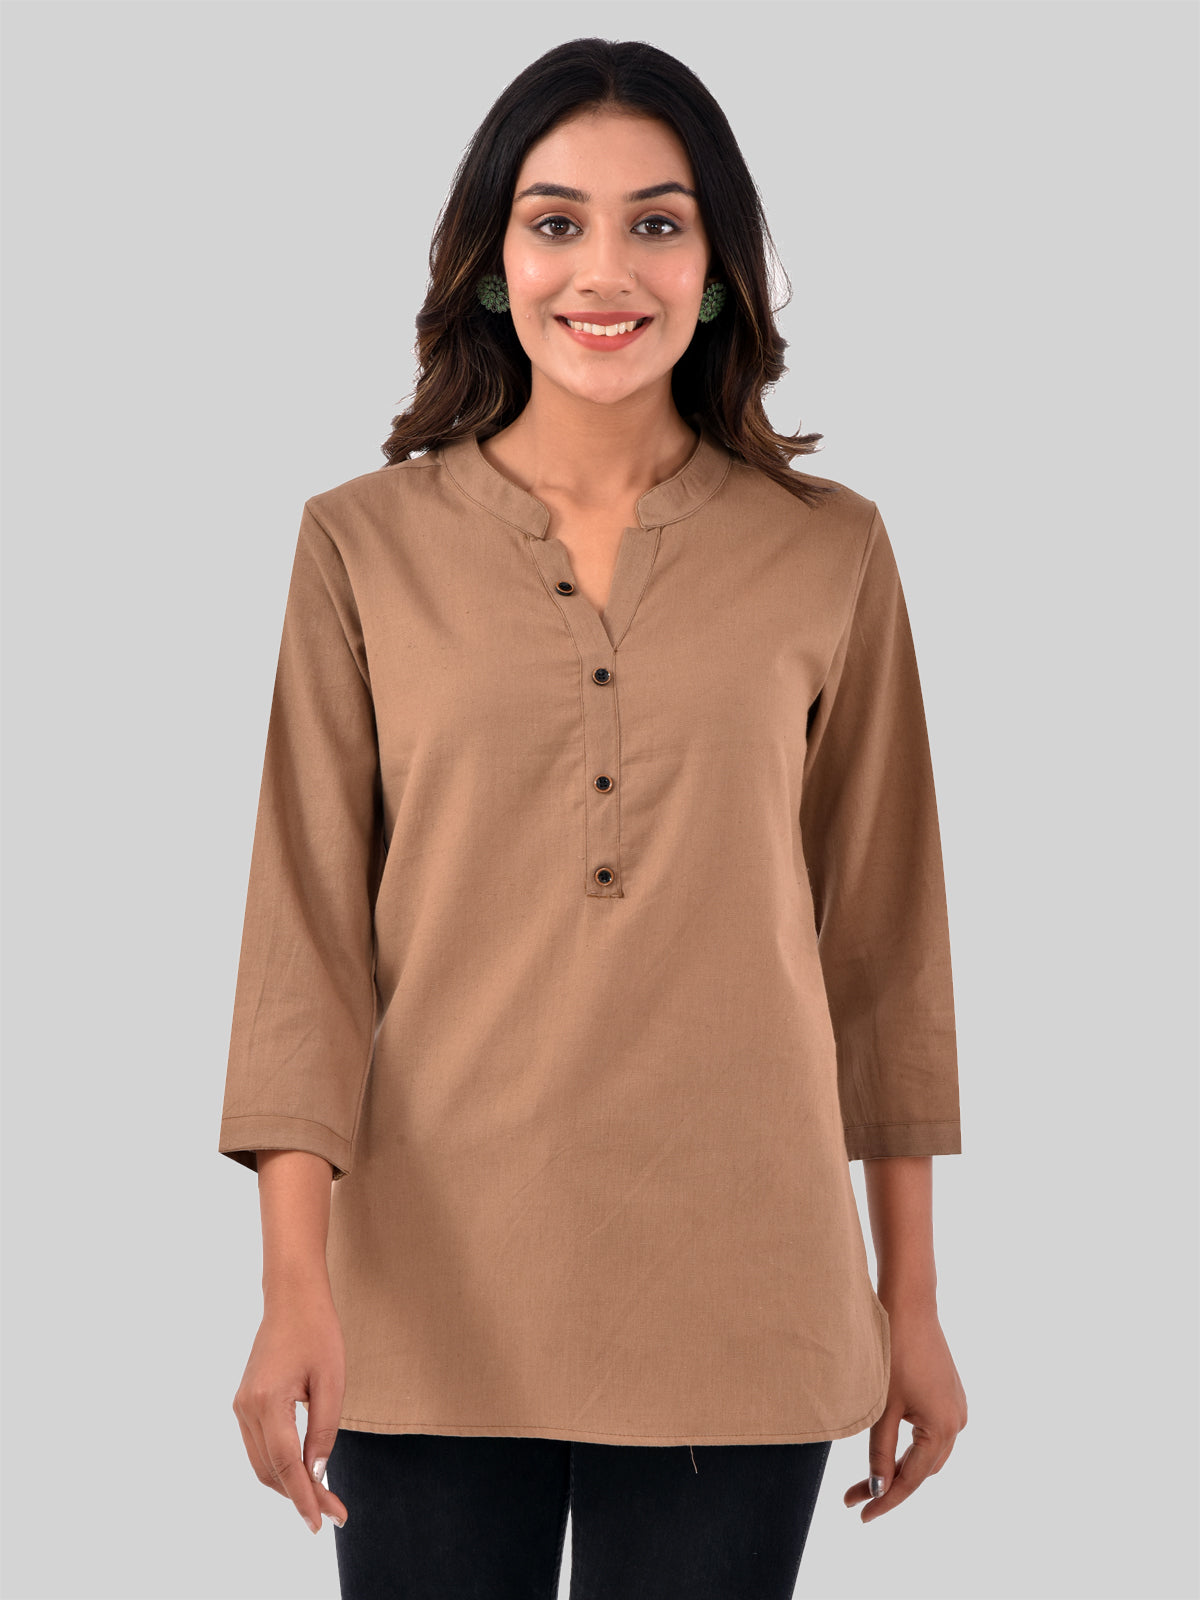 Womens Casual Three Fourth Sleeves Solid Brown Cotton Tops